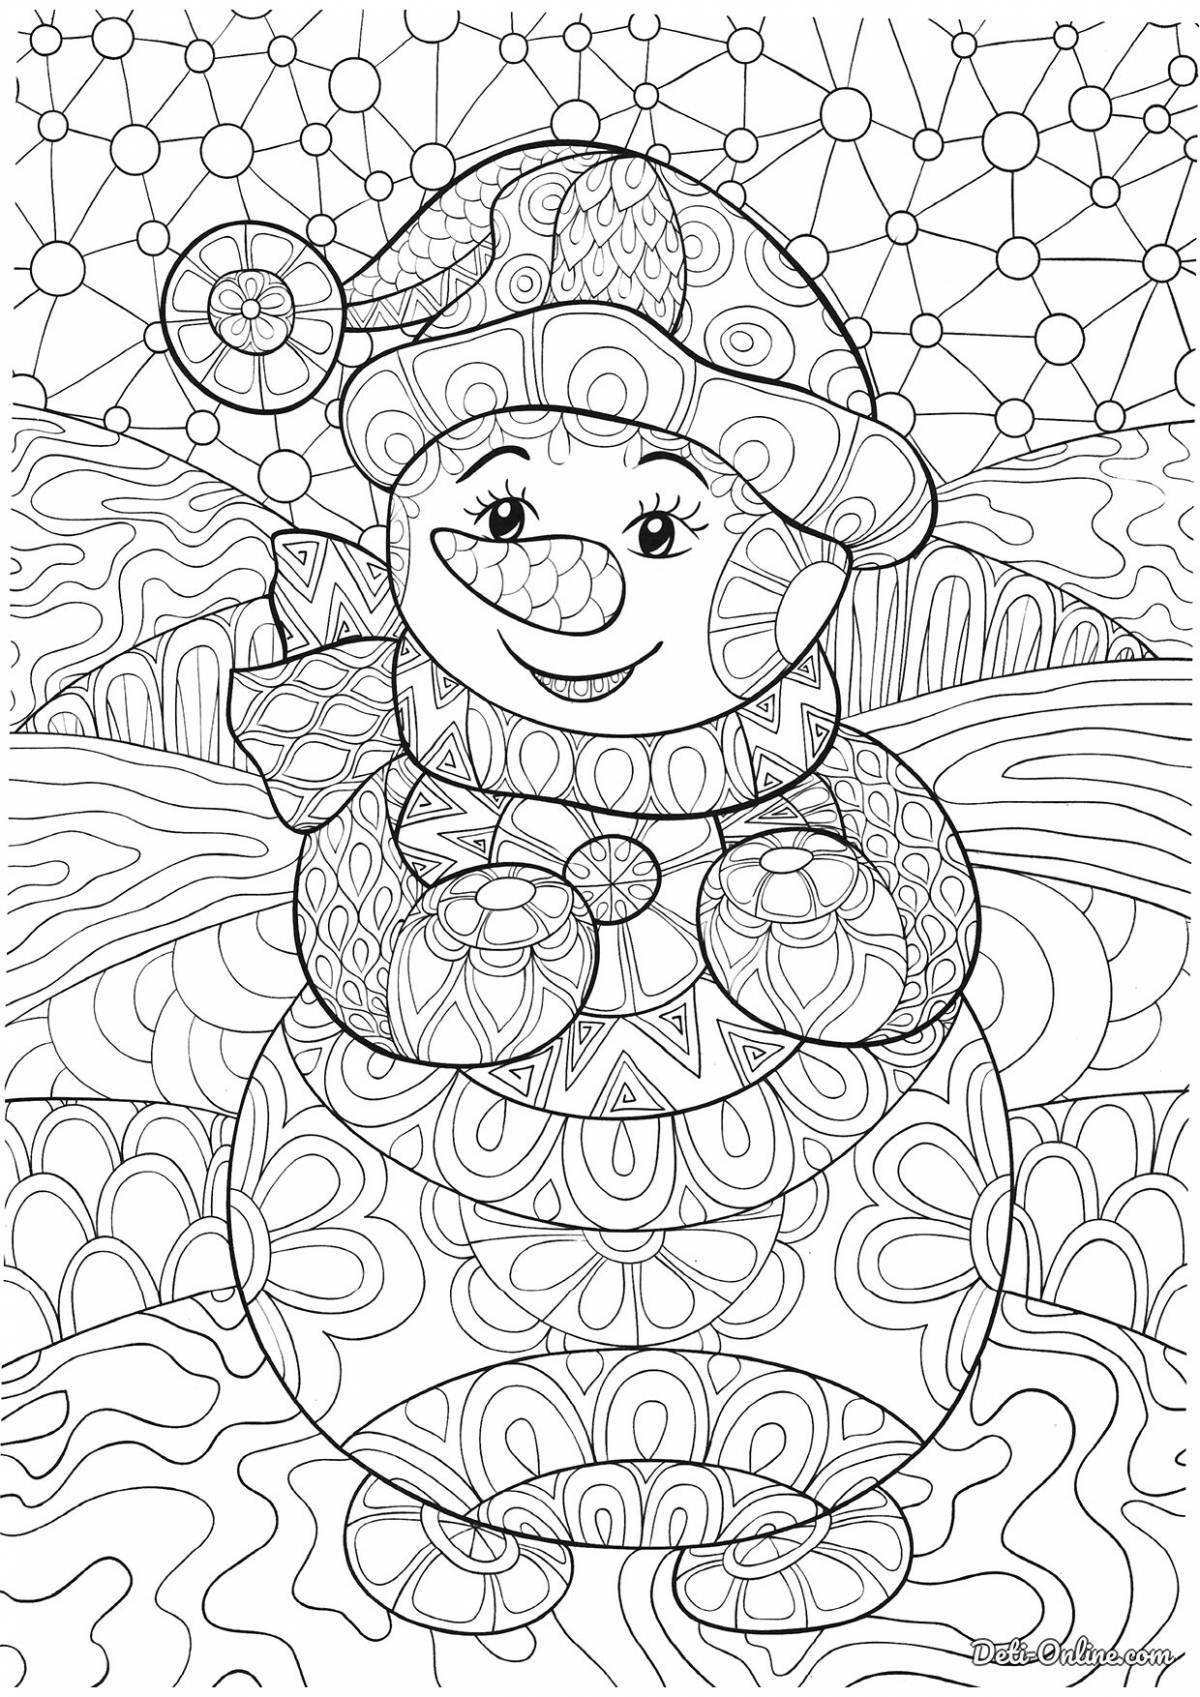 Peace coloring antistress winter